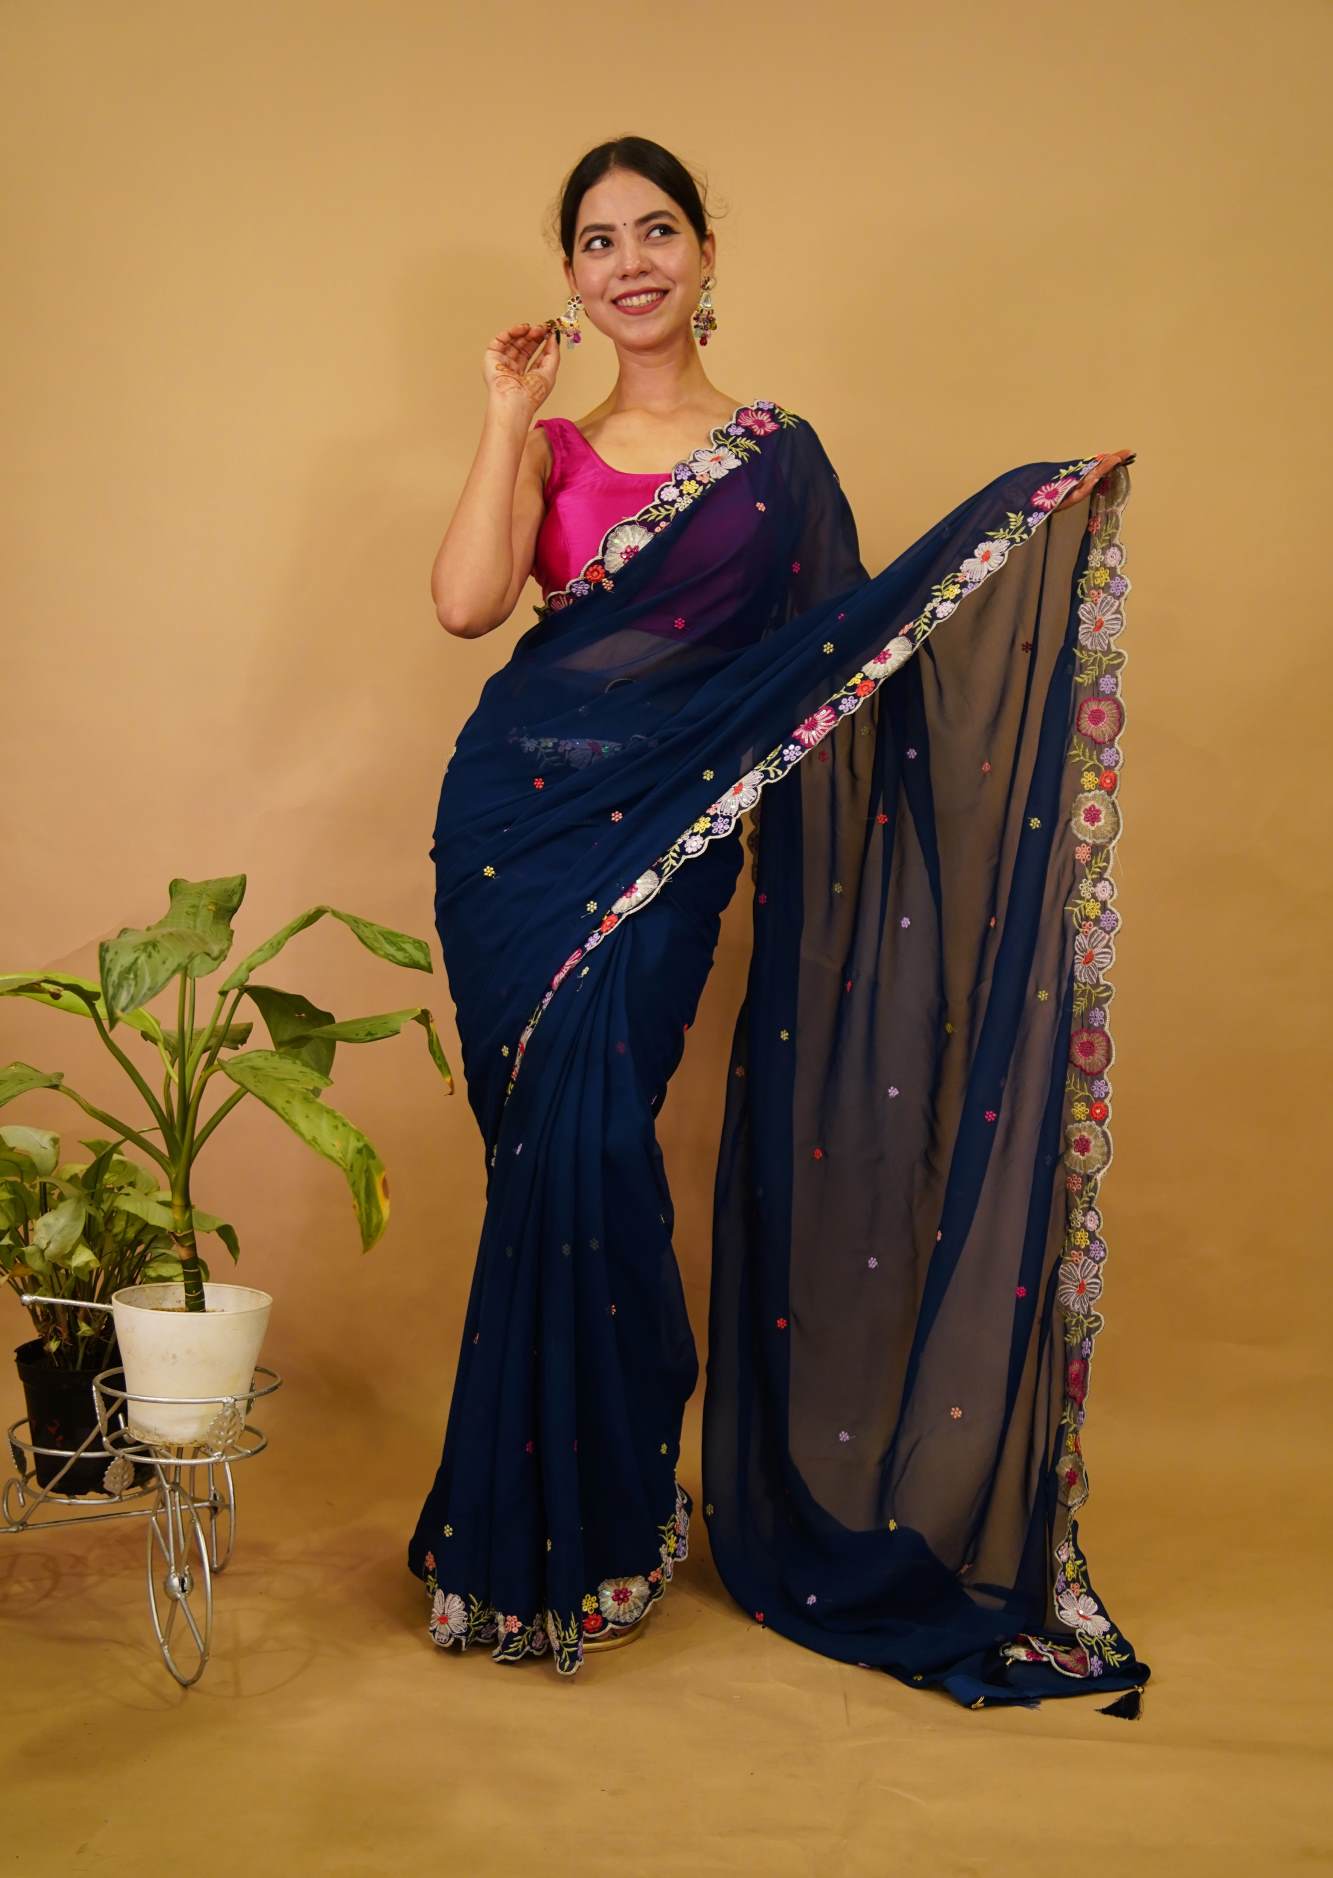 Beautiful Floral Embroidered Border And Overall Blue Saree With Sequin Ready To Wear Saree